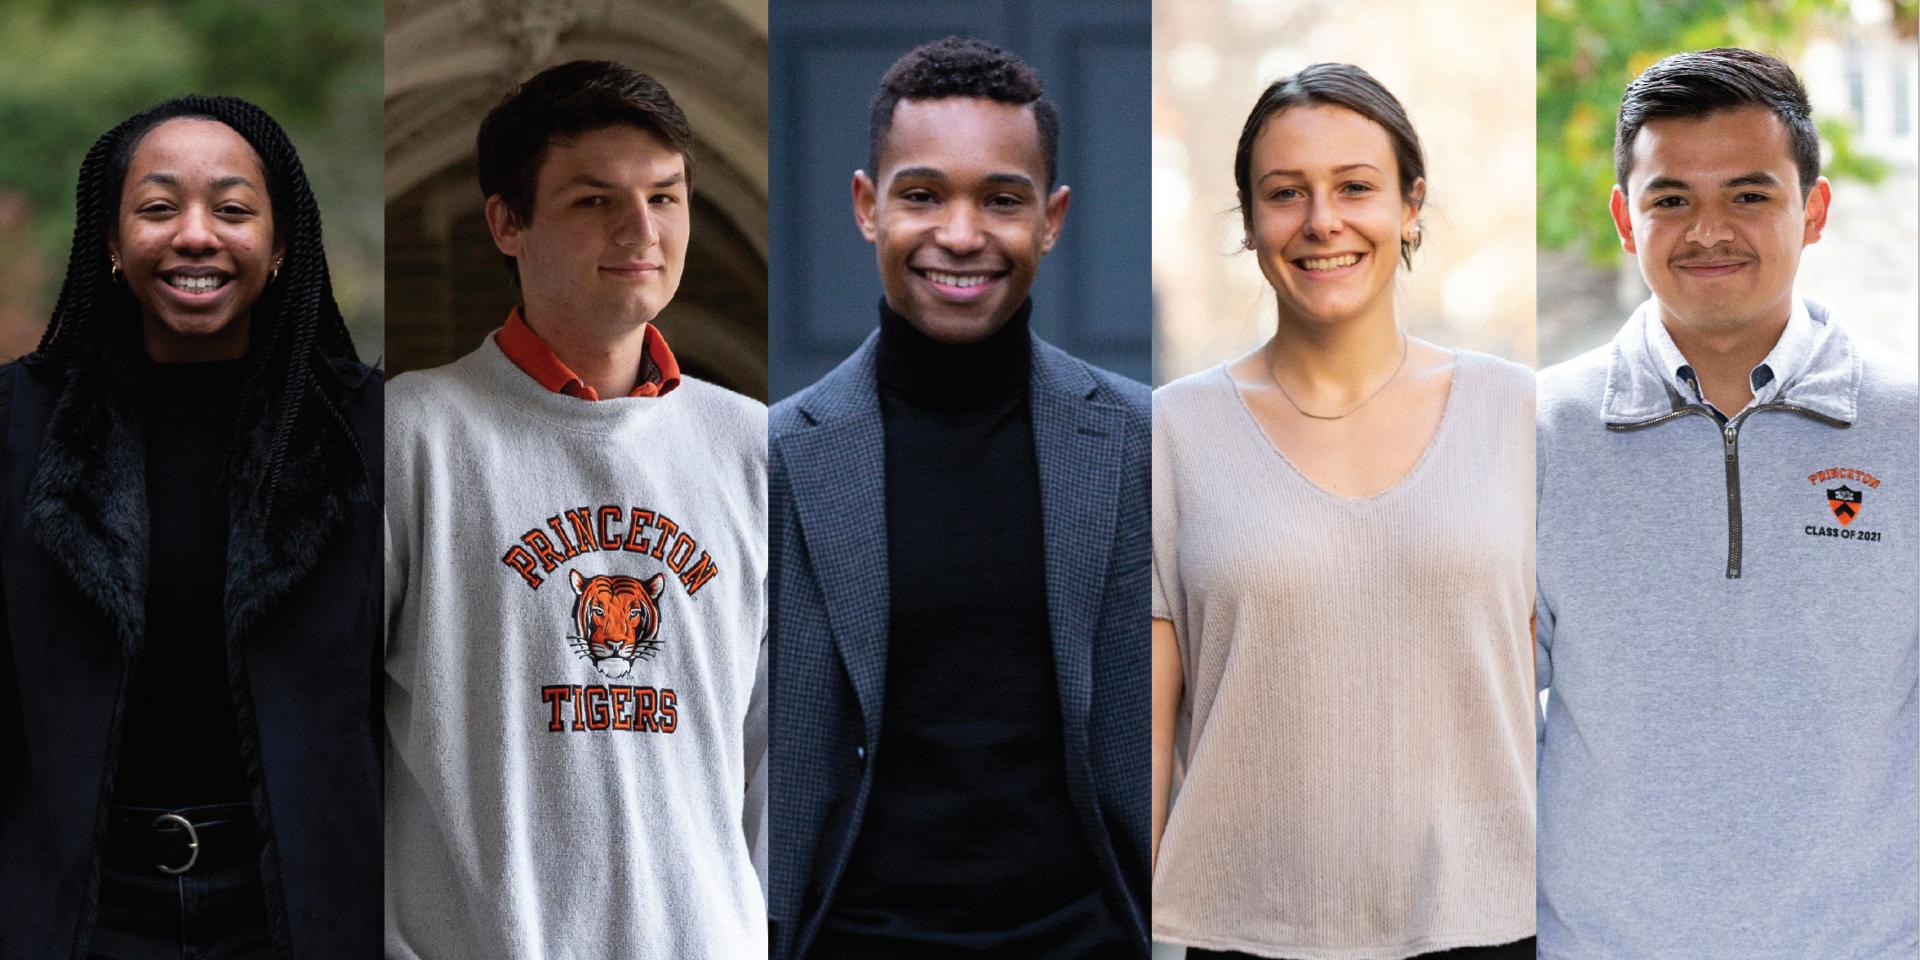 Five Princeton students who have scholarships